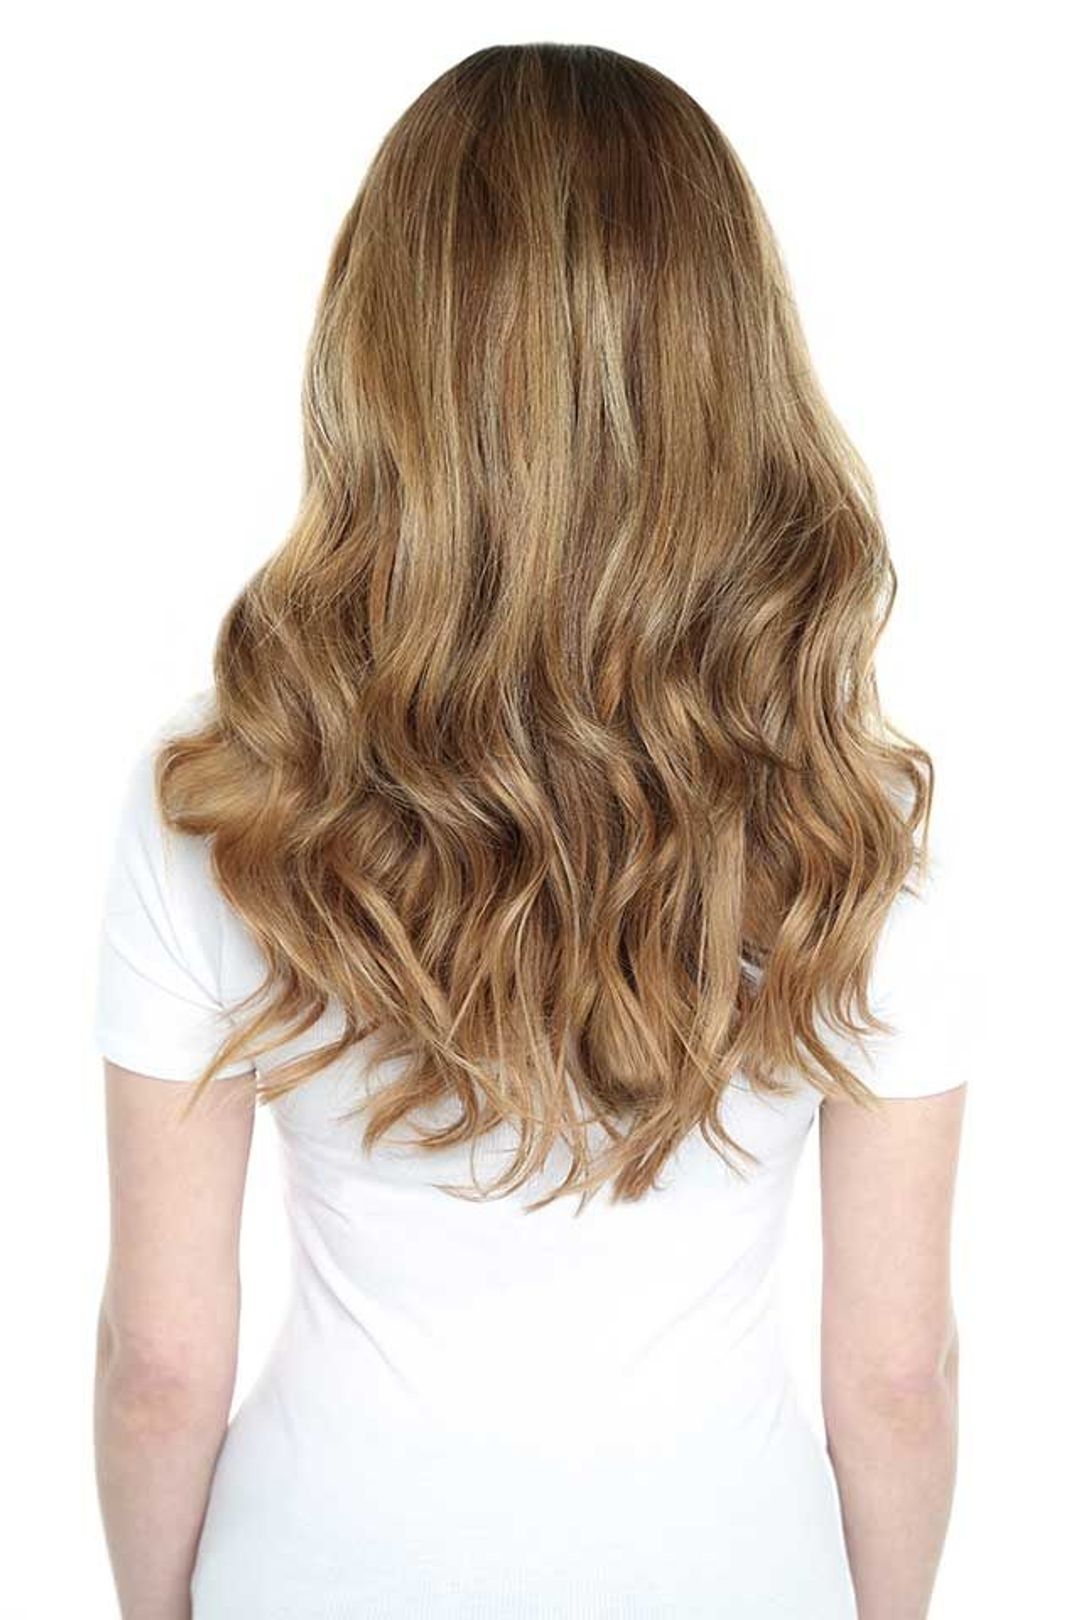 Beauty Works Celebrity Choice Weft Hair Extensions - Champagne Blonde,16"